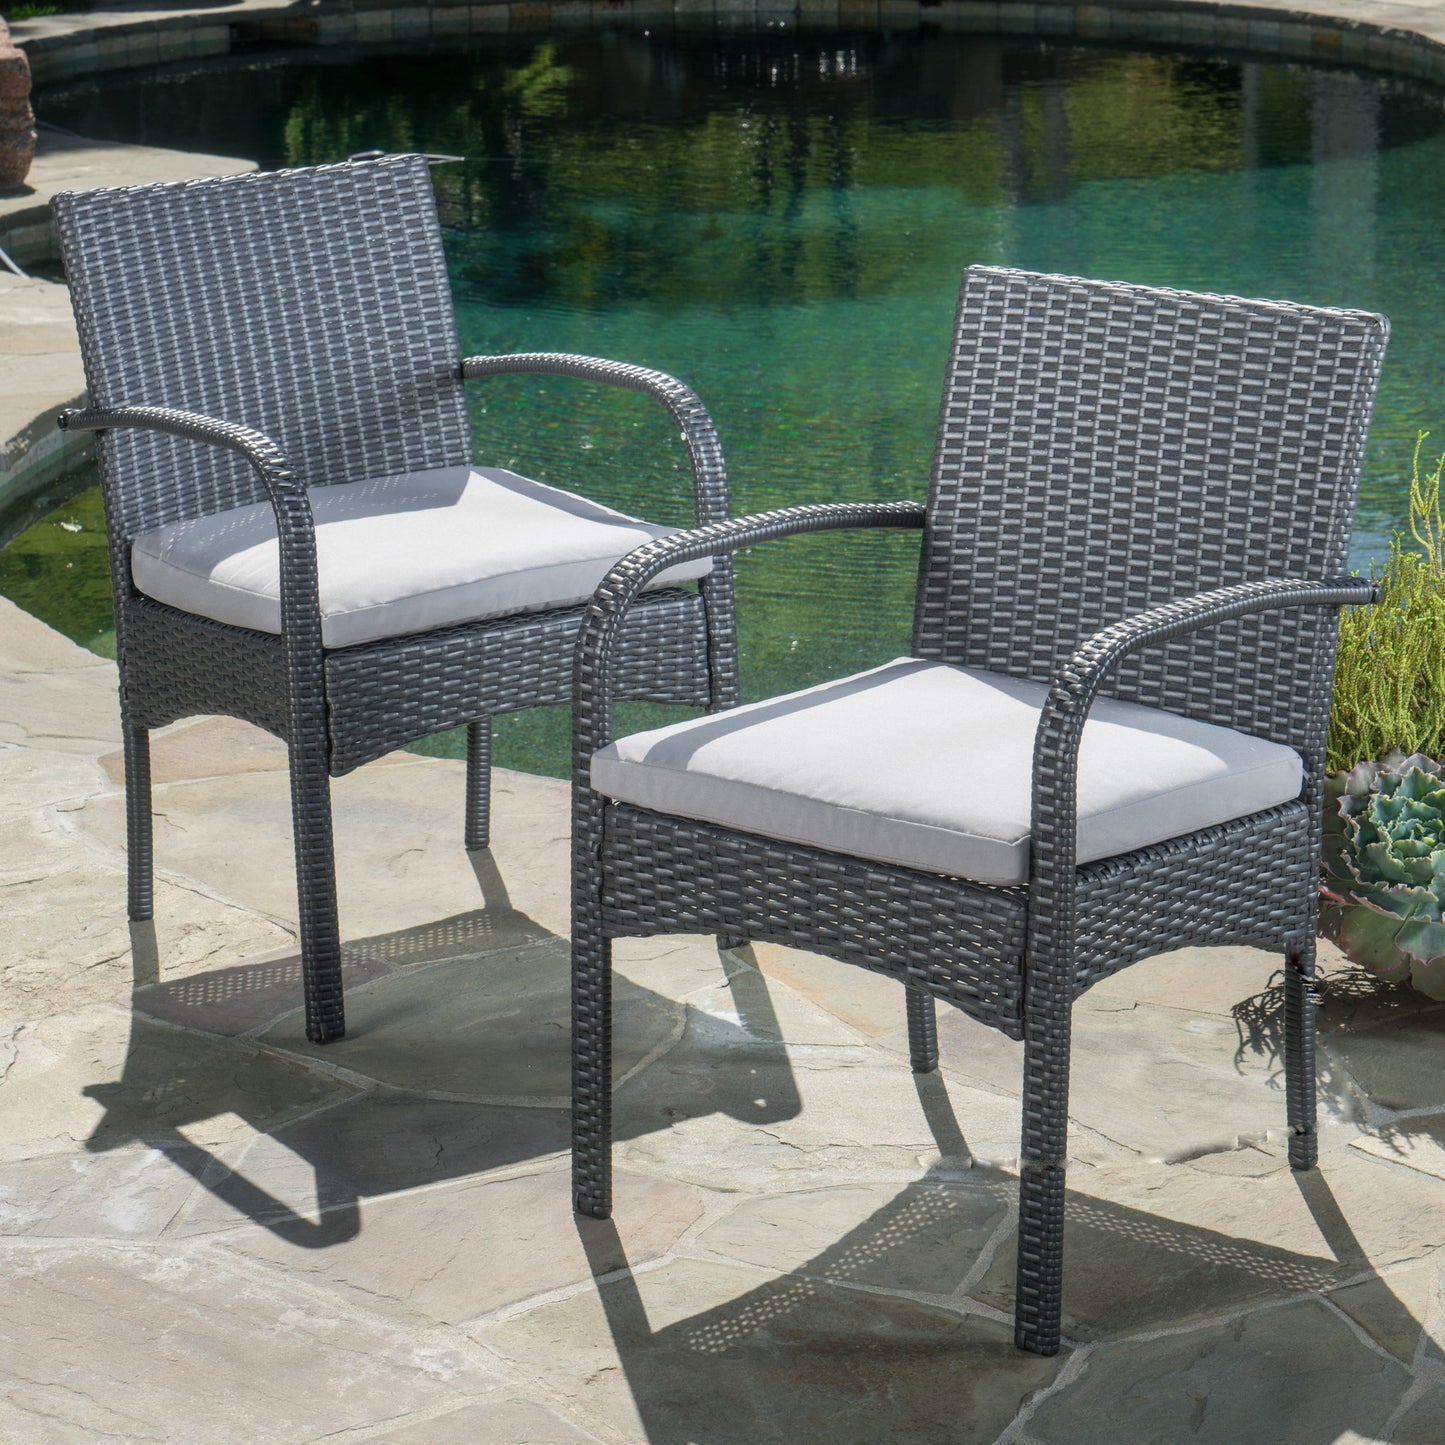 Pattinson Outdoor 5 Piece Grey Wicker Dining Set with Cushions